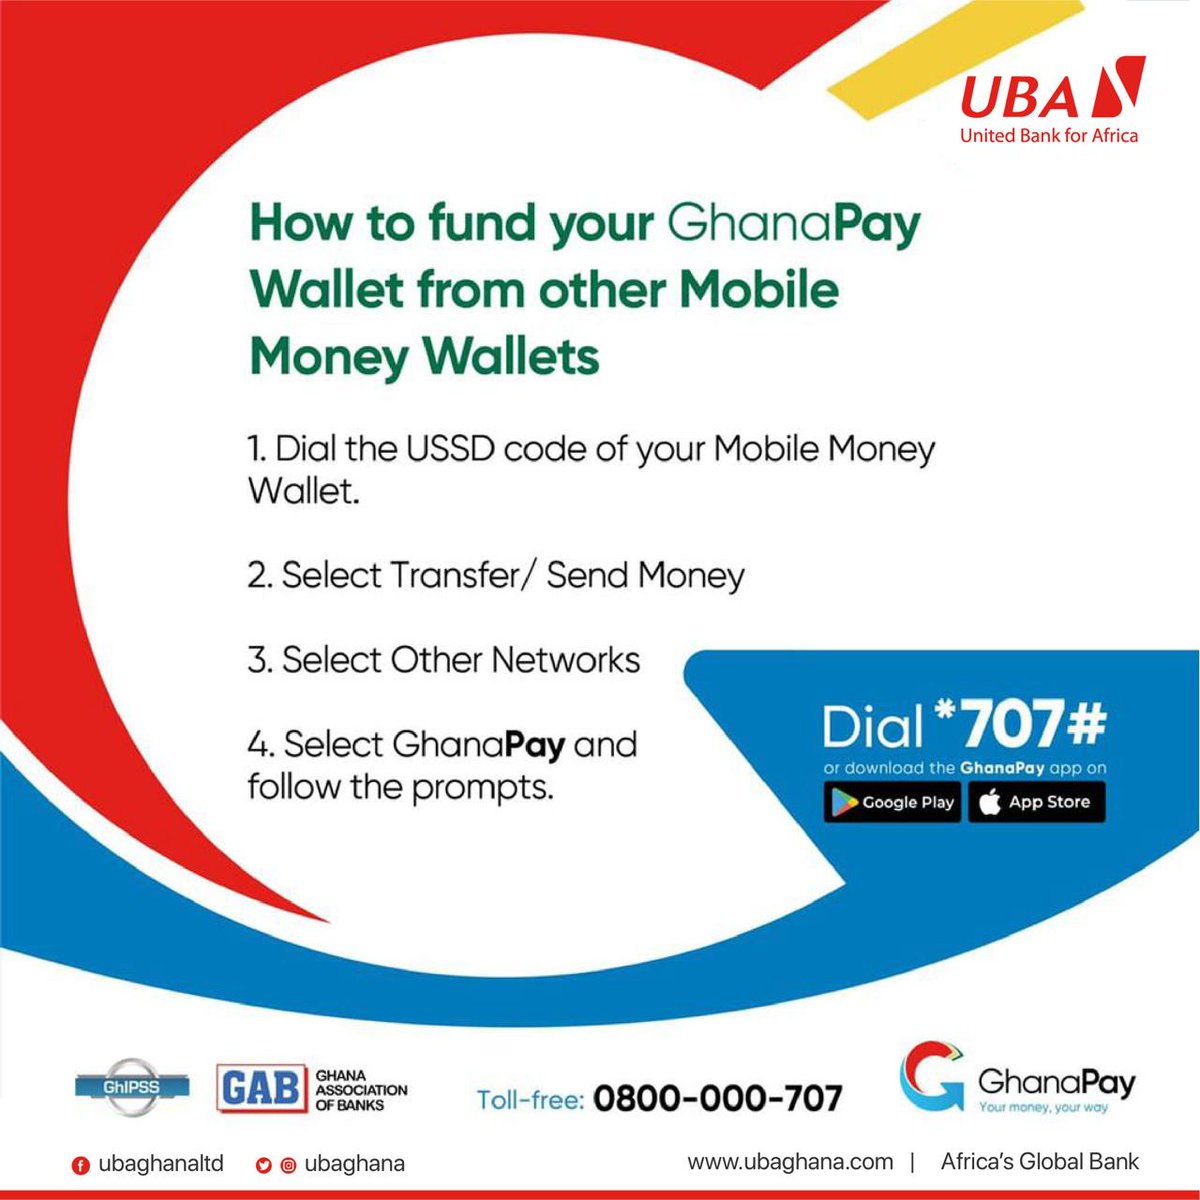 Fund your GhanaPay wallet with these easy steps 👌

#GhanaPay #AfricasGlobalBank